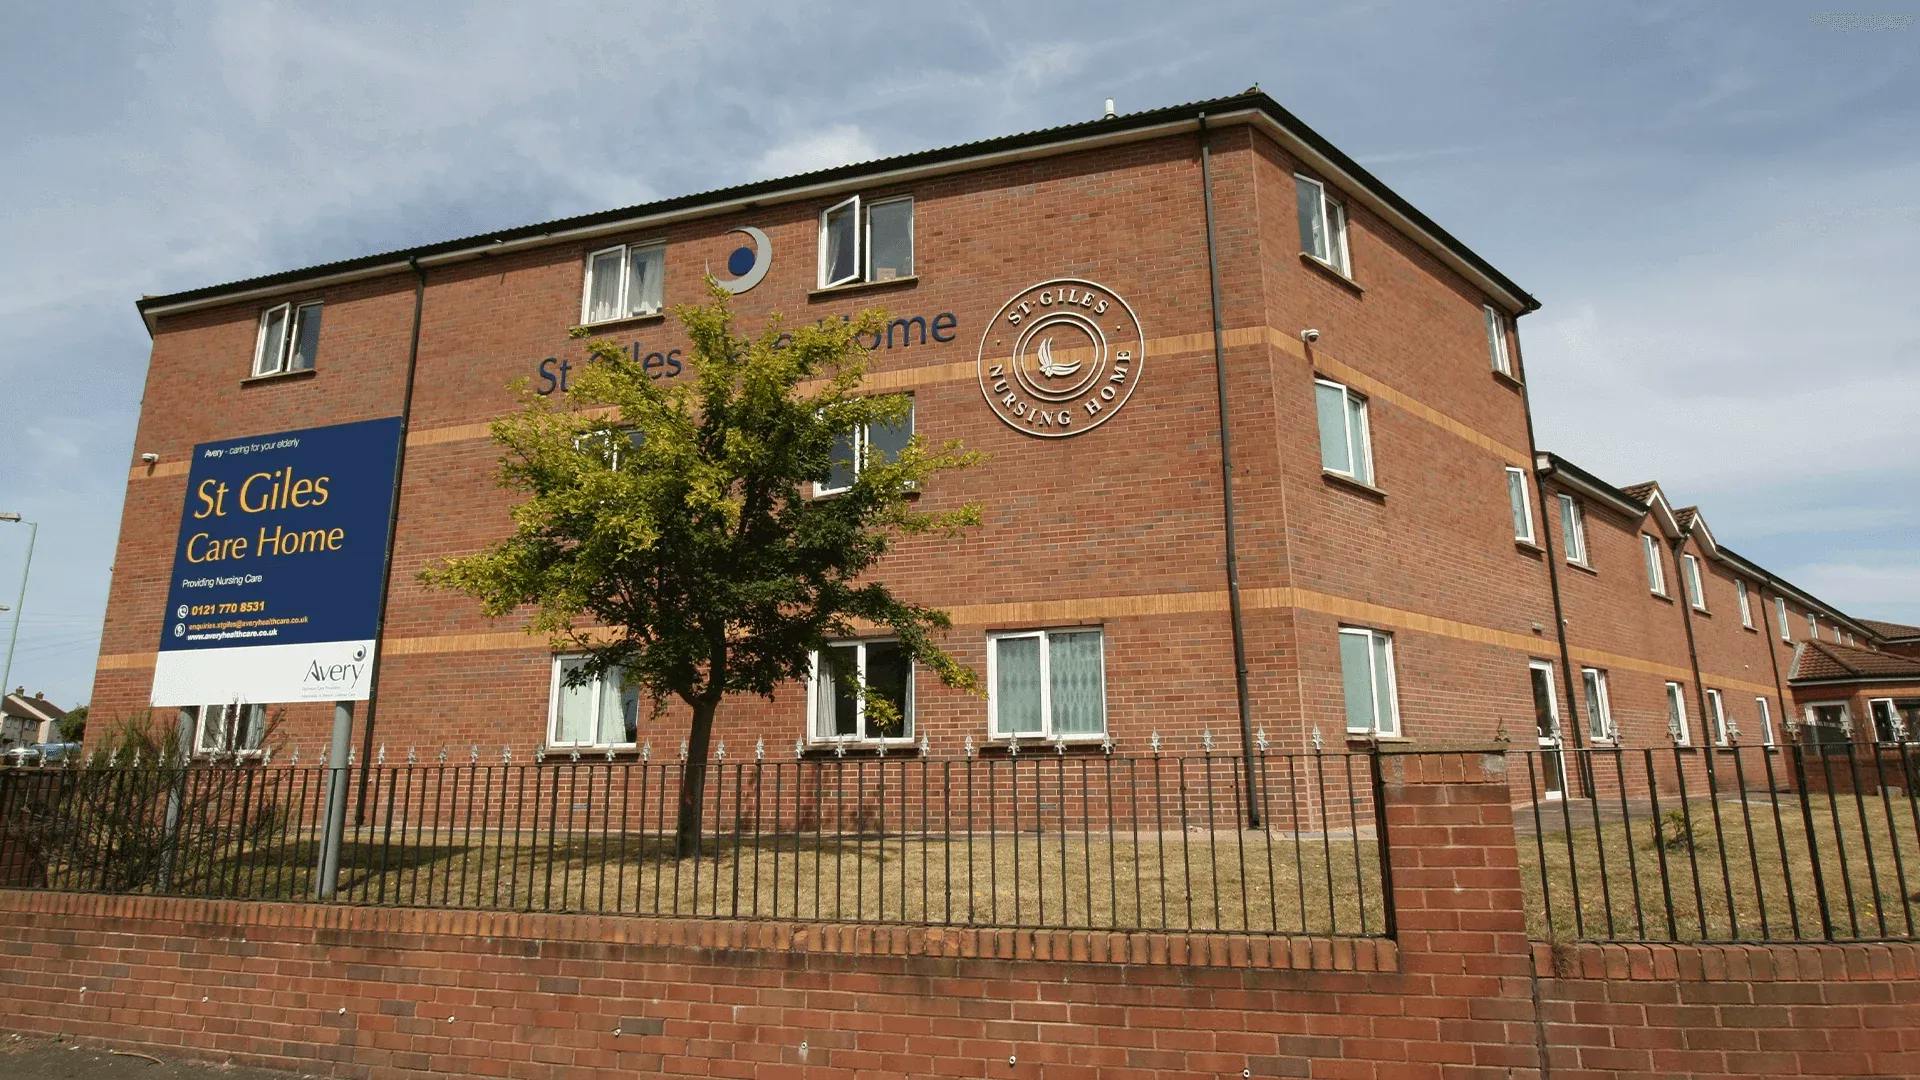 St. Giles care home